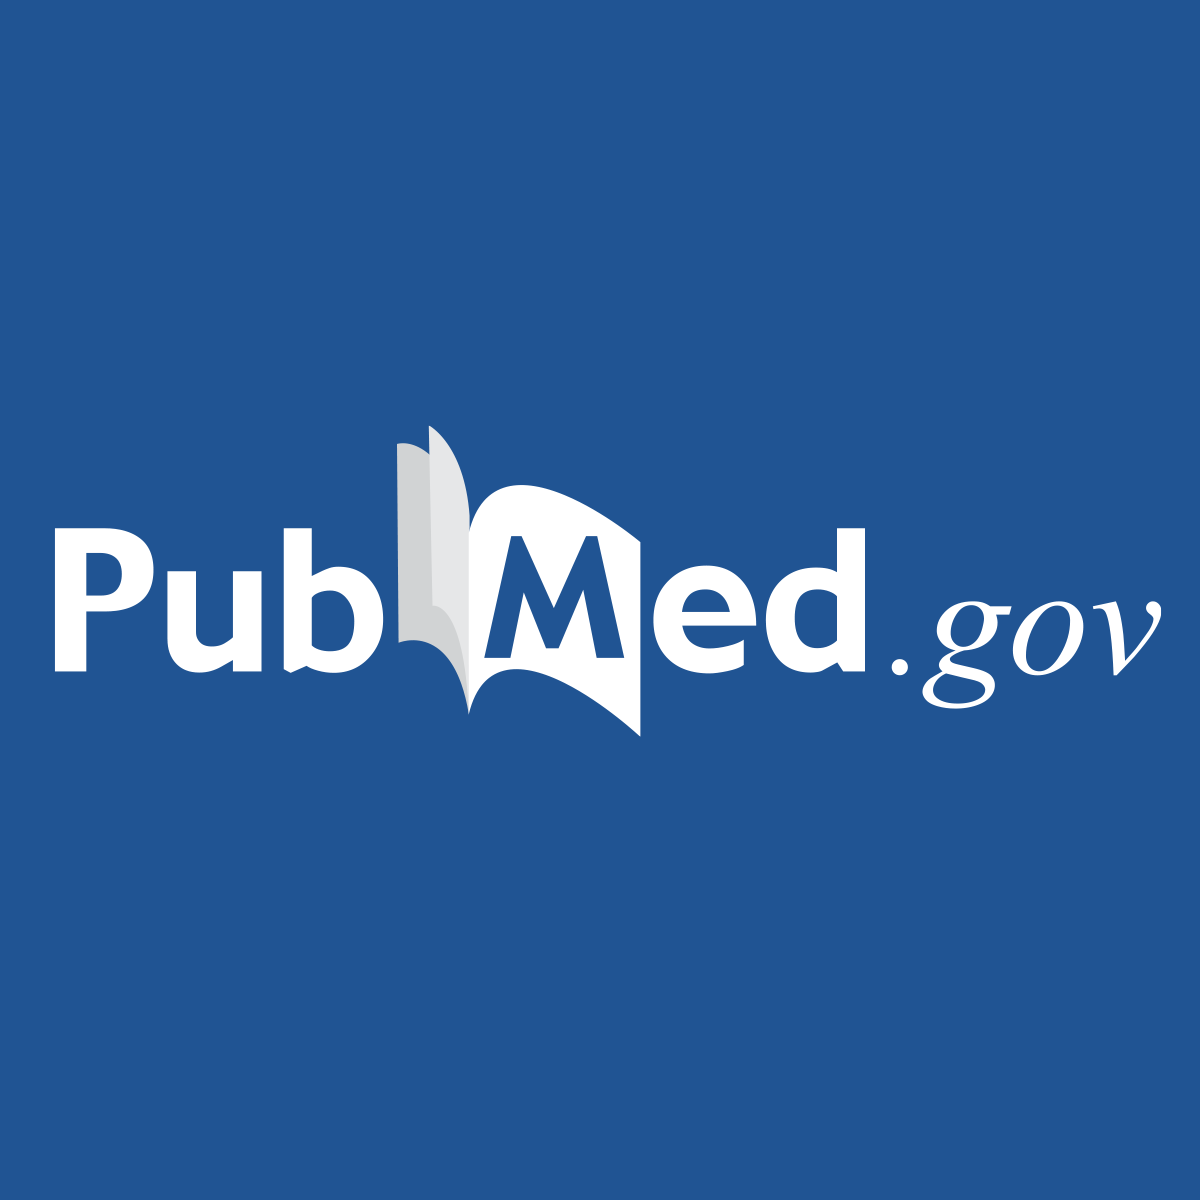 INfluenza Vaccine Indication During therapy with Immune checkpoint inhibitors: a transversal challenge. The INVIDIa study - PubMed